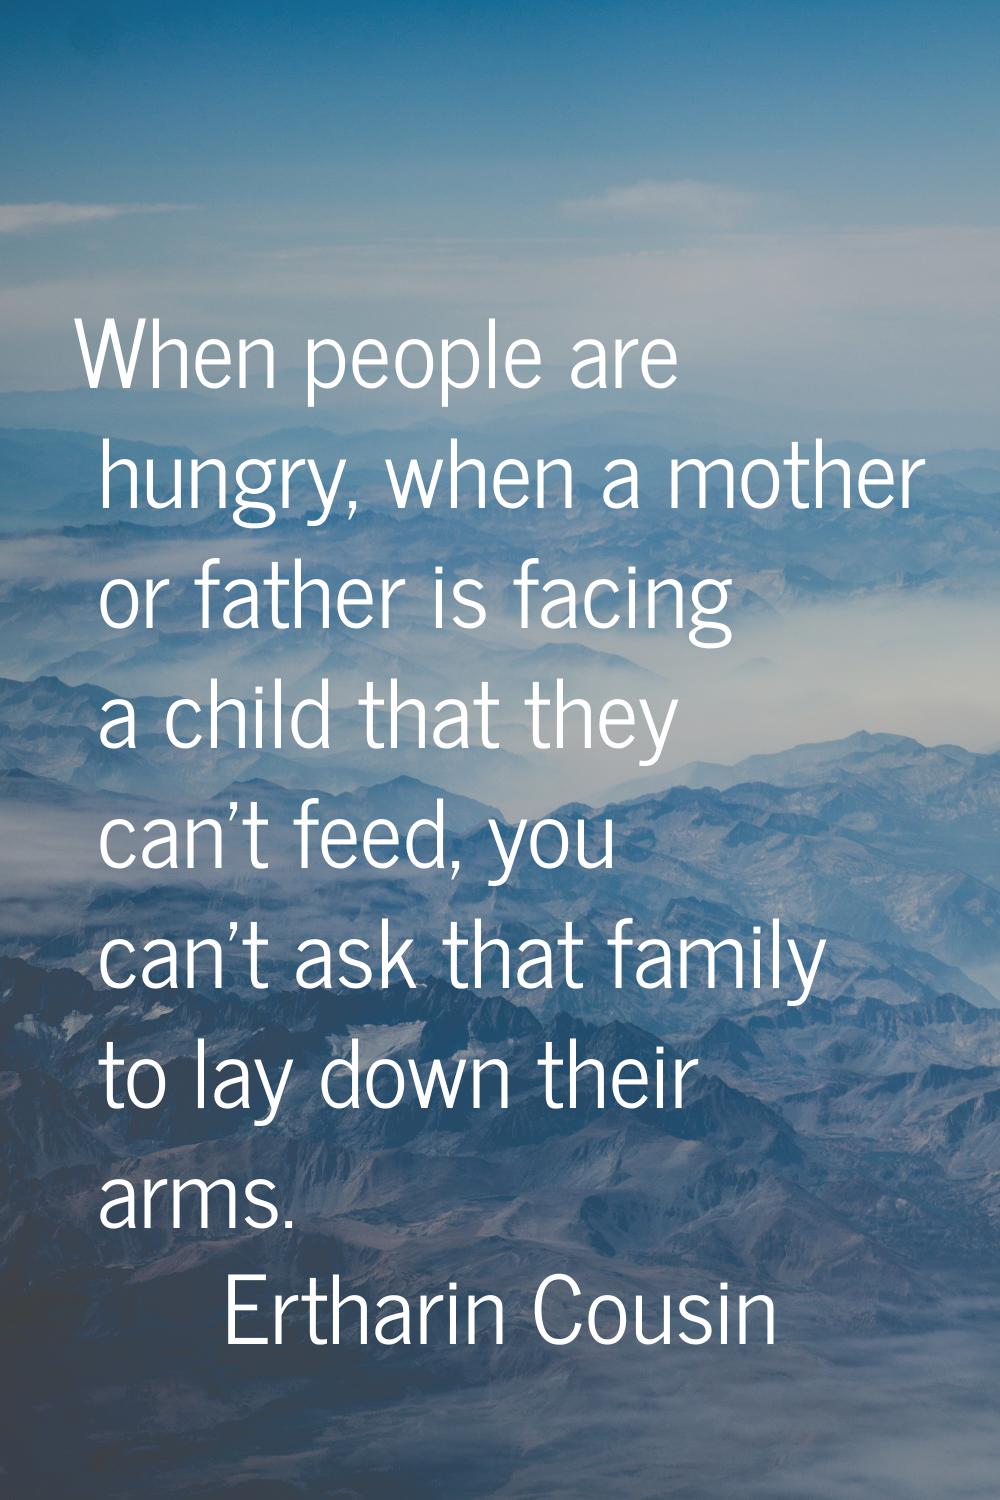 When people are hungry, when a mother or father is facing a child that they can't feed, you can't a